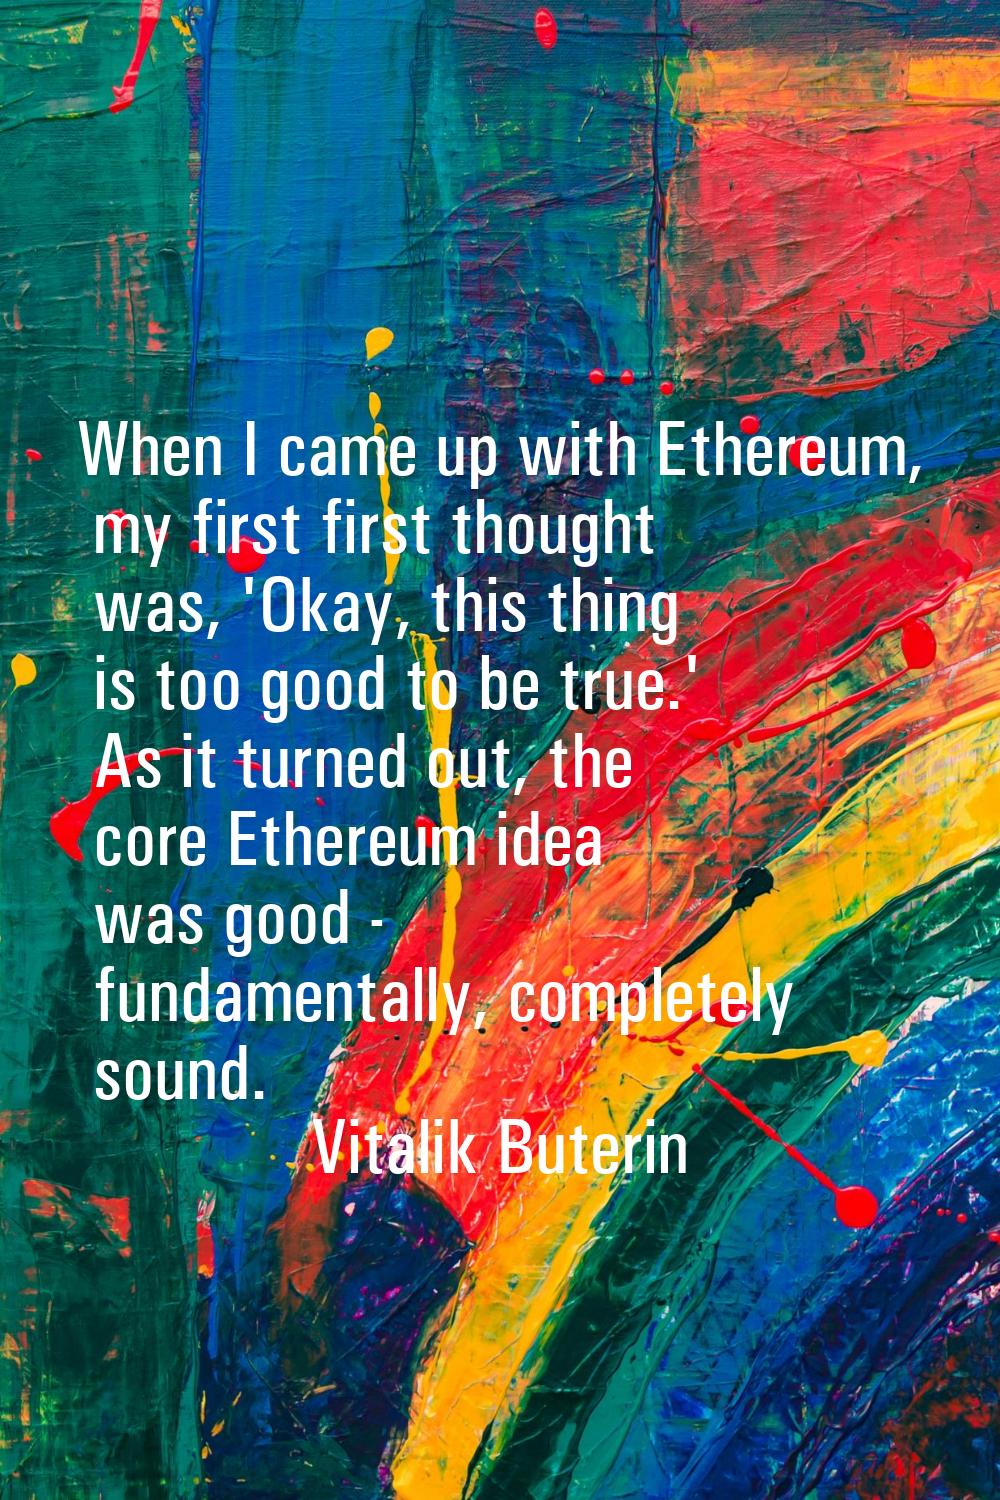 When I came up with Ethereum, my first first thought was, 'Okay, this thing is too good to be true.